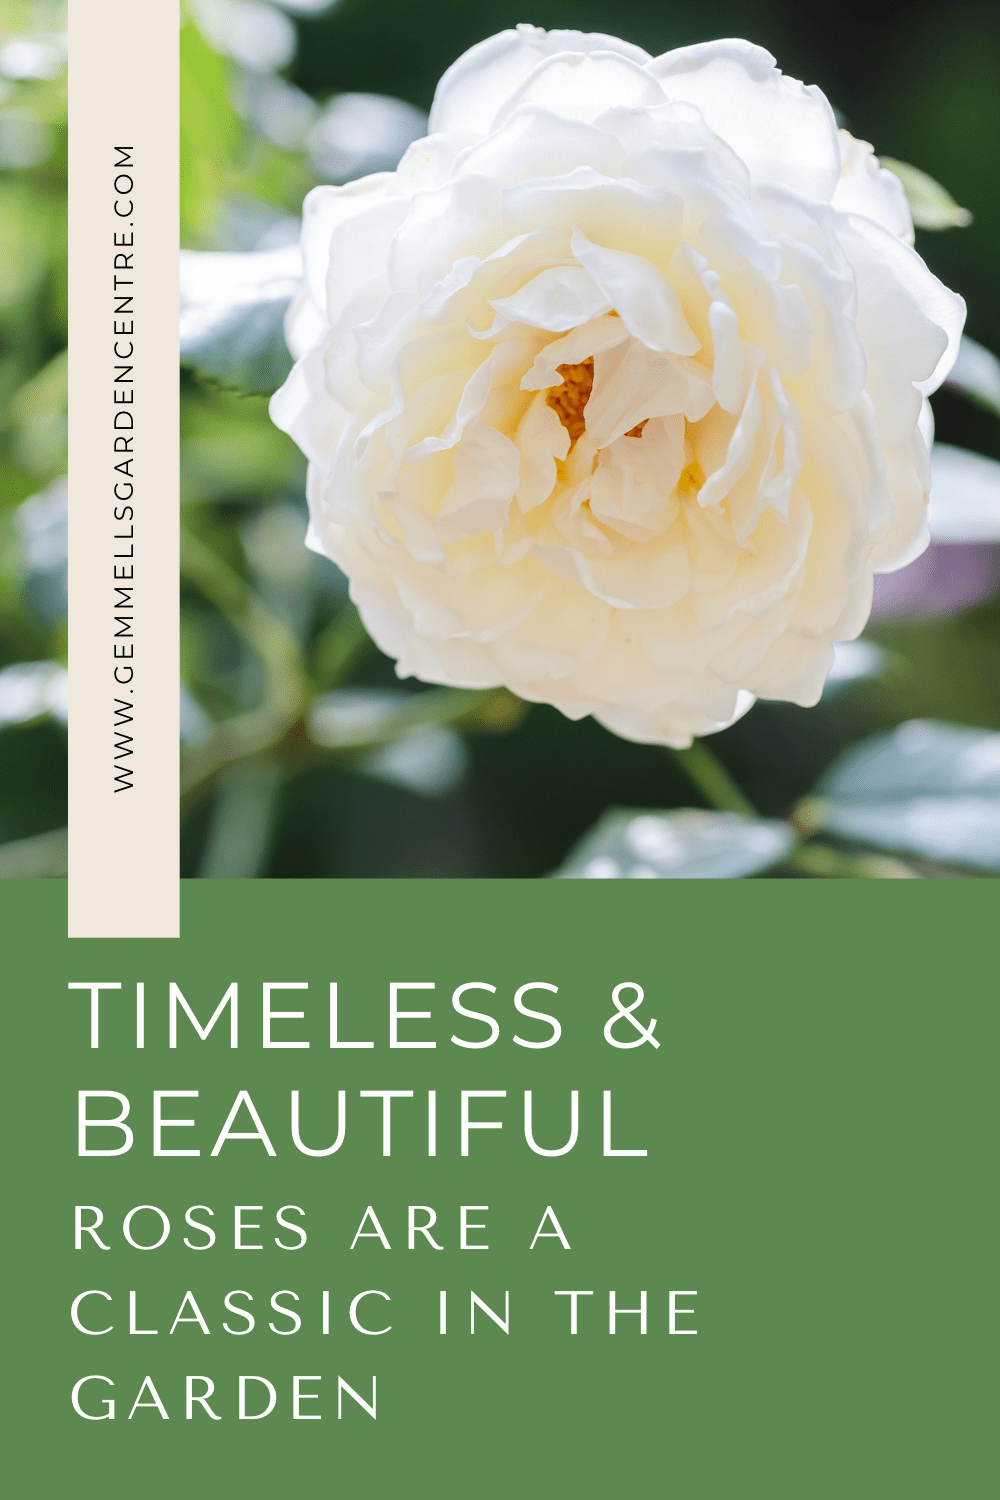 Timeless and beautiful Roses are a Classic in the Garden